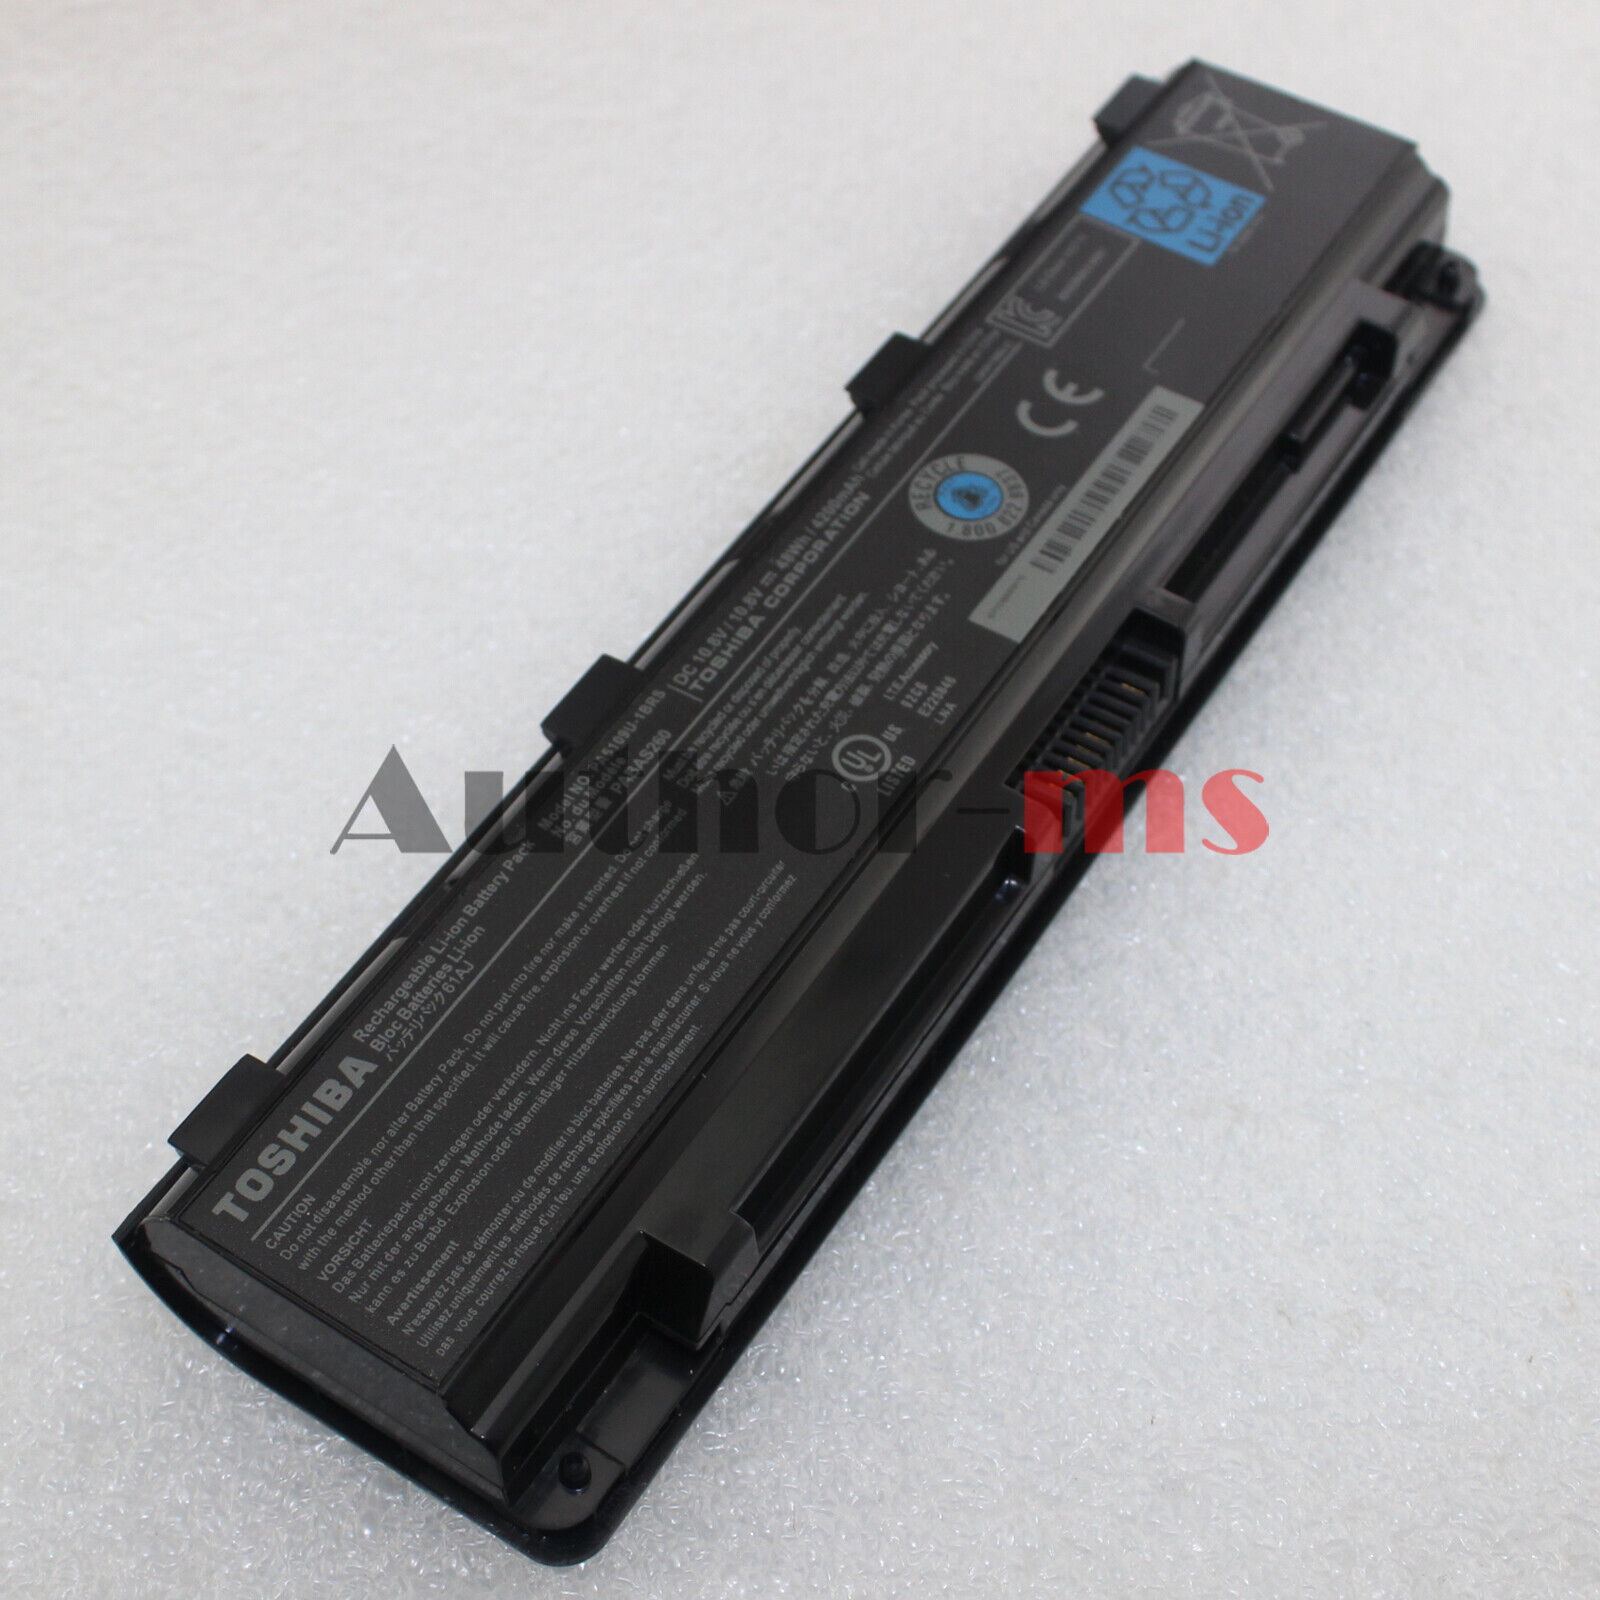 OEM Fit Toshiba C840 C850 L70 L75D PA5109U-1BRS PA5024U-1BRS Laptop Battery 48Wh